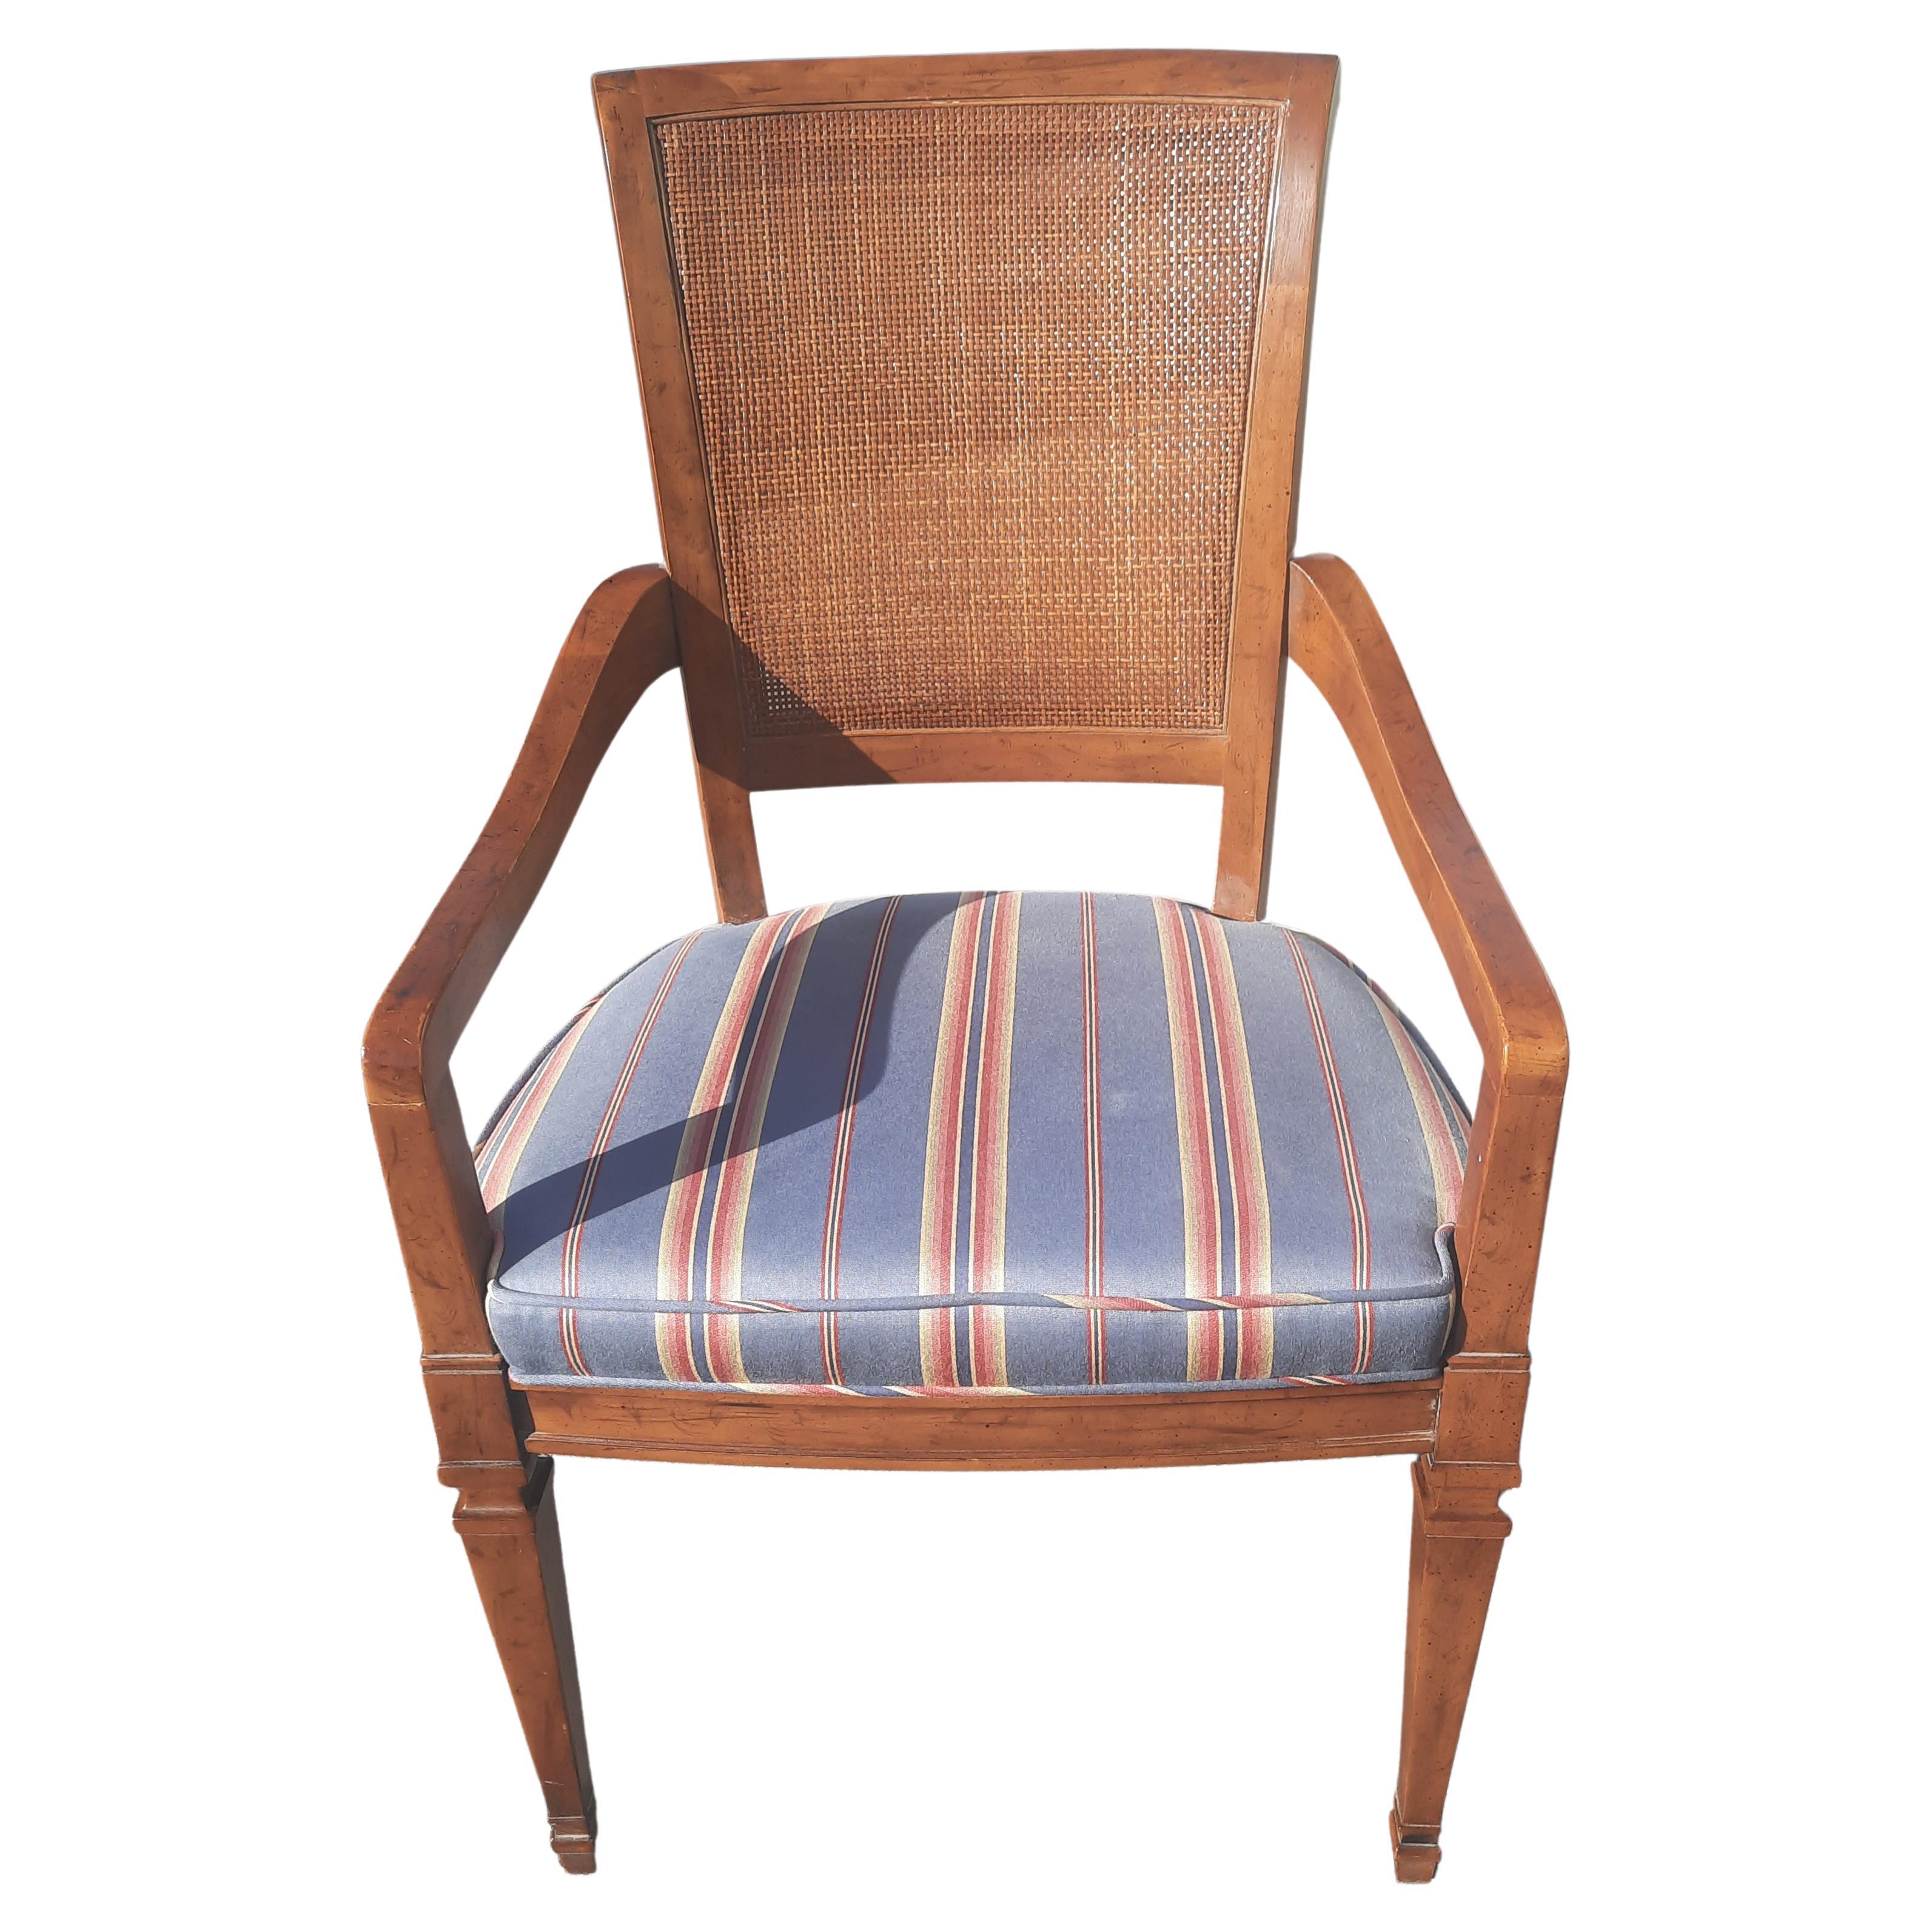 A pair of armchairs in the French Country style by Henredon. Walnut with cane backs, fabric seats. Made in the Morganton, NC, USA in the mid-20th century. Measures: Overall: 21.25